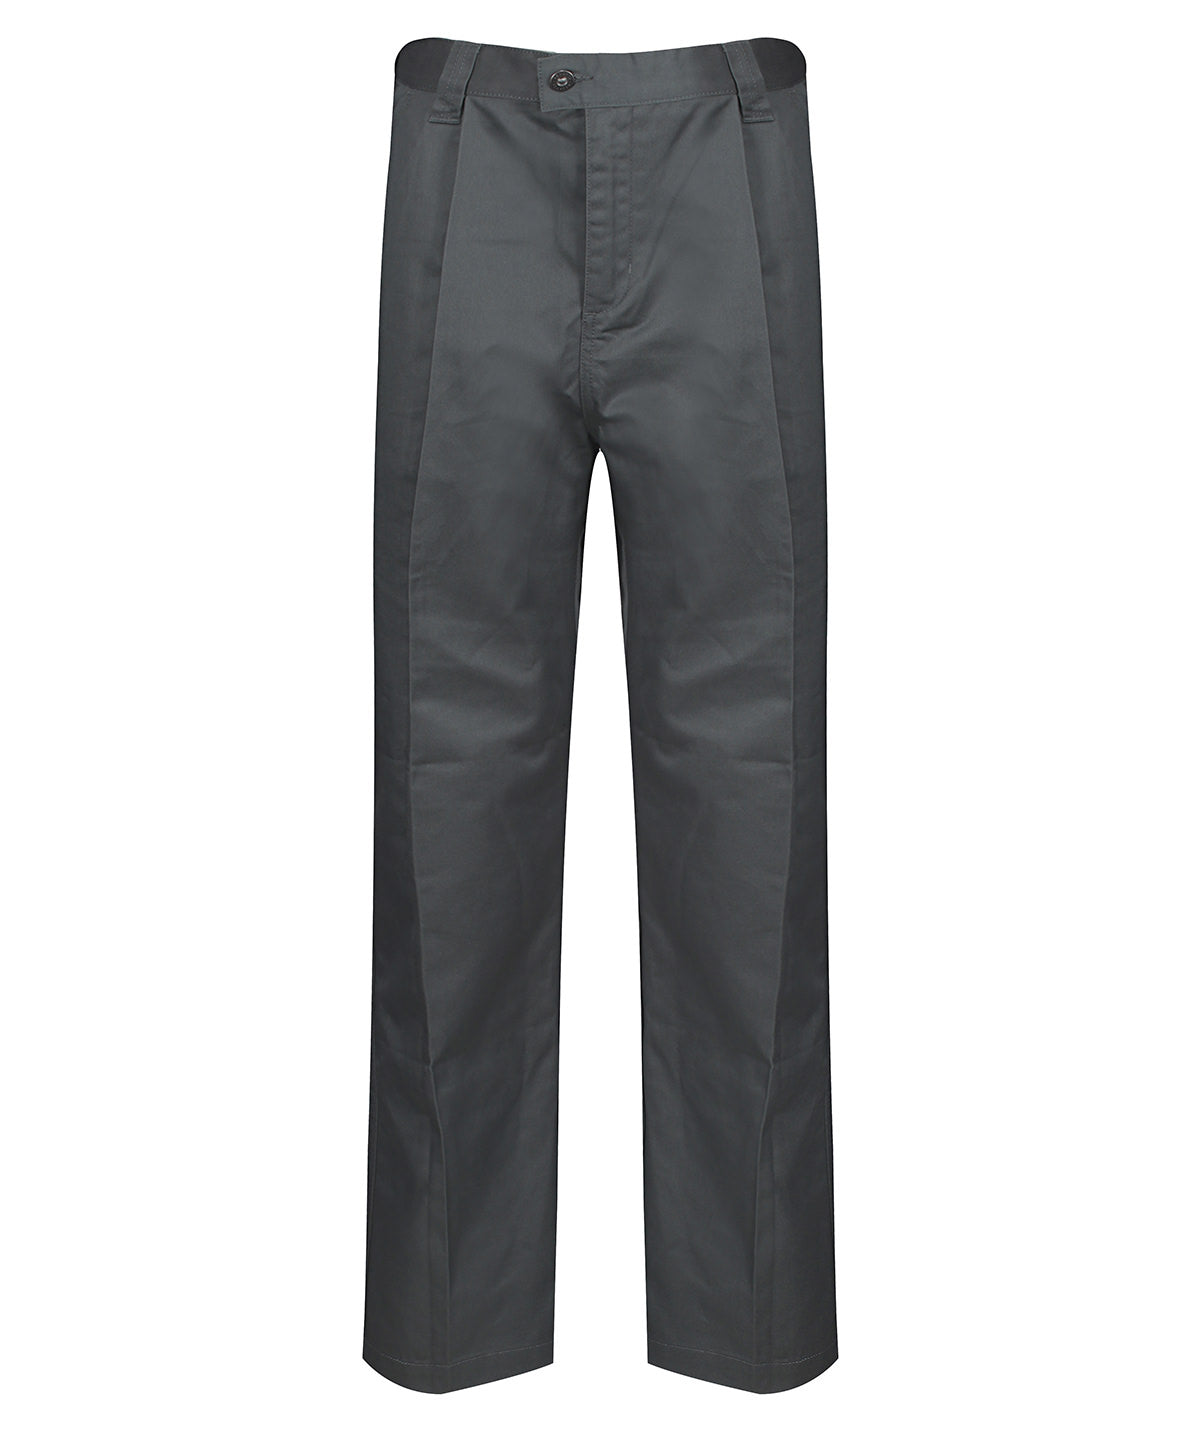 Combine Trousers